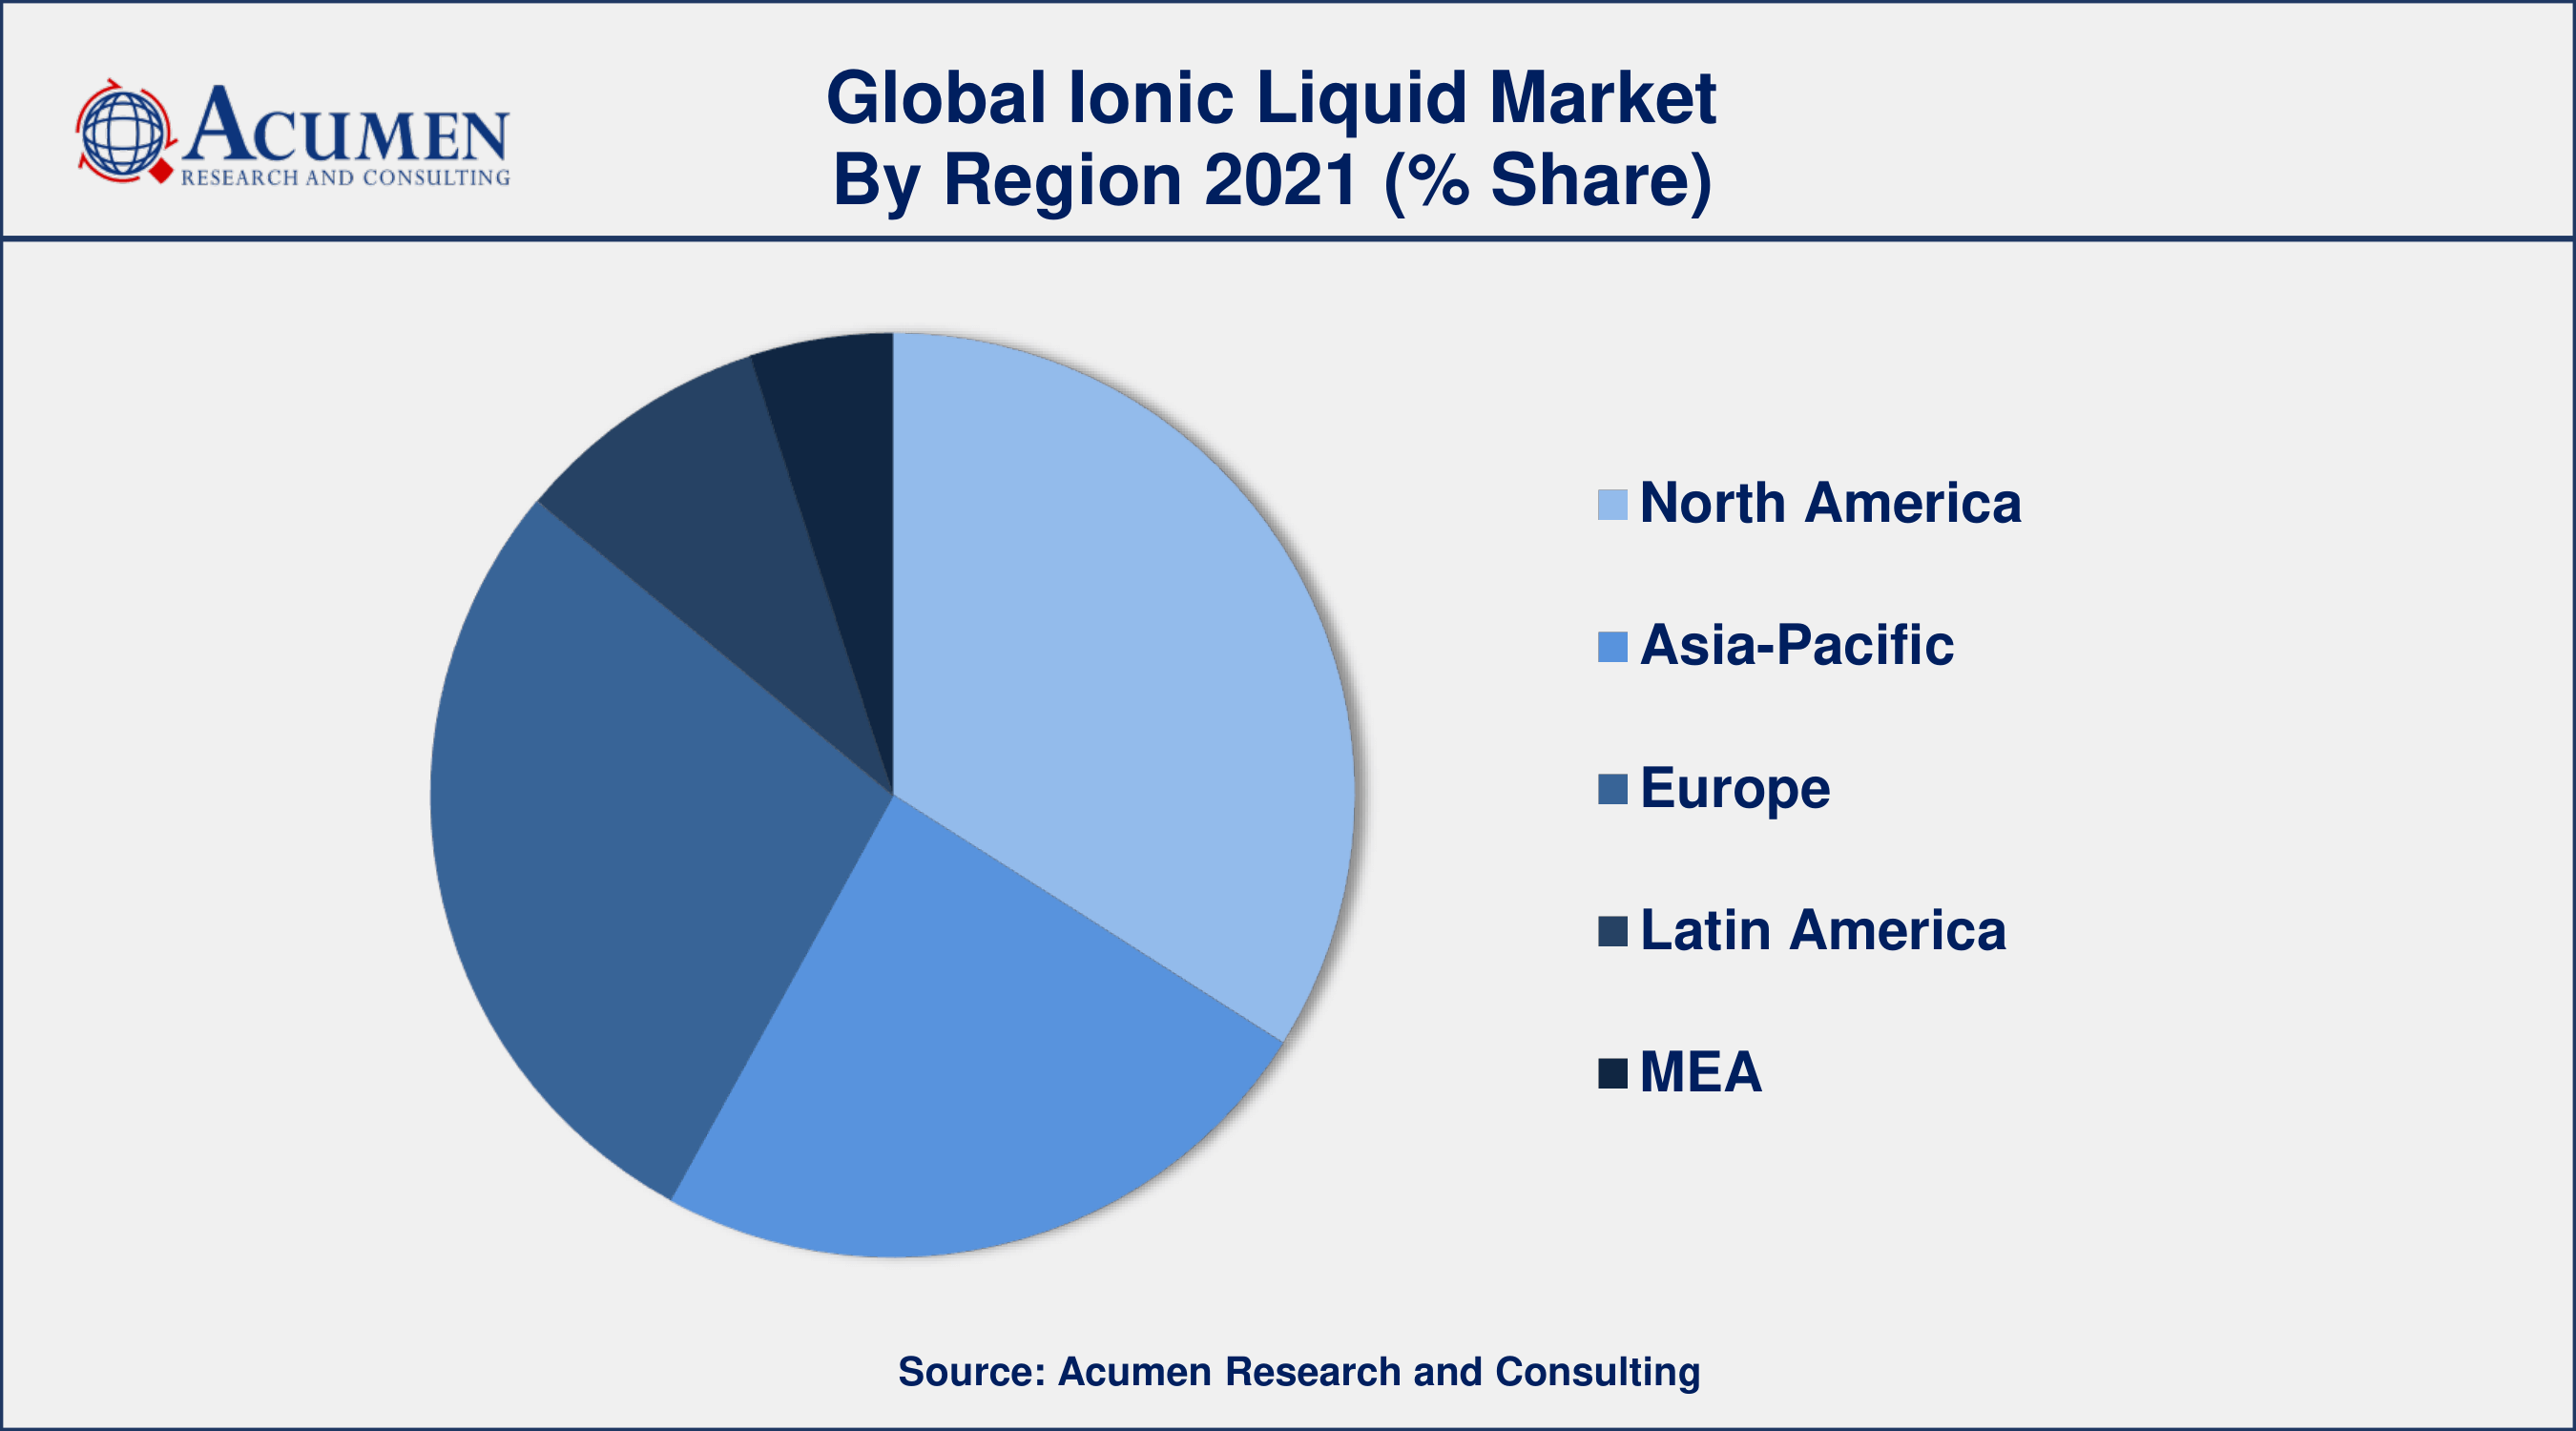 Asia-Pacific ionic liquid market growth will observe fastest CAGR of 19% from 2022 to 2030